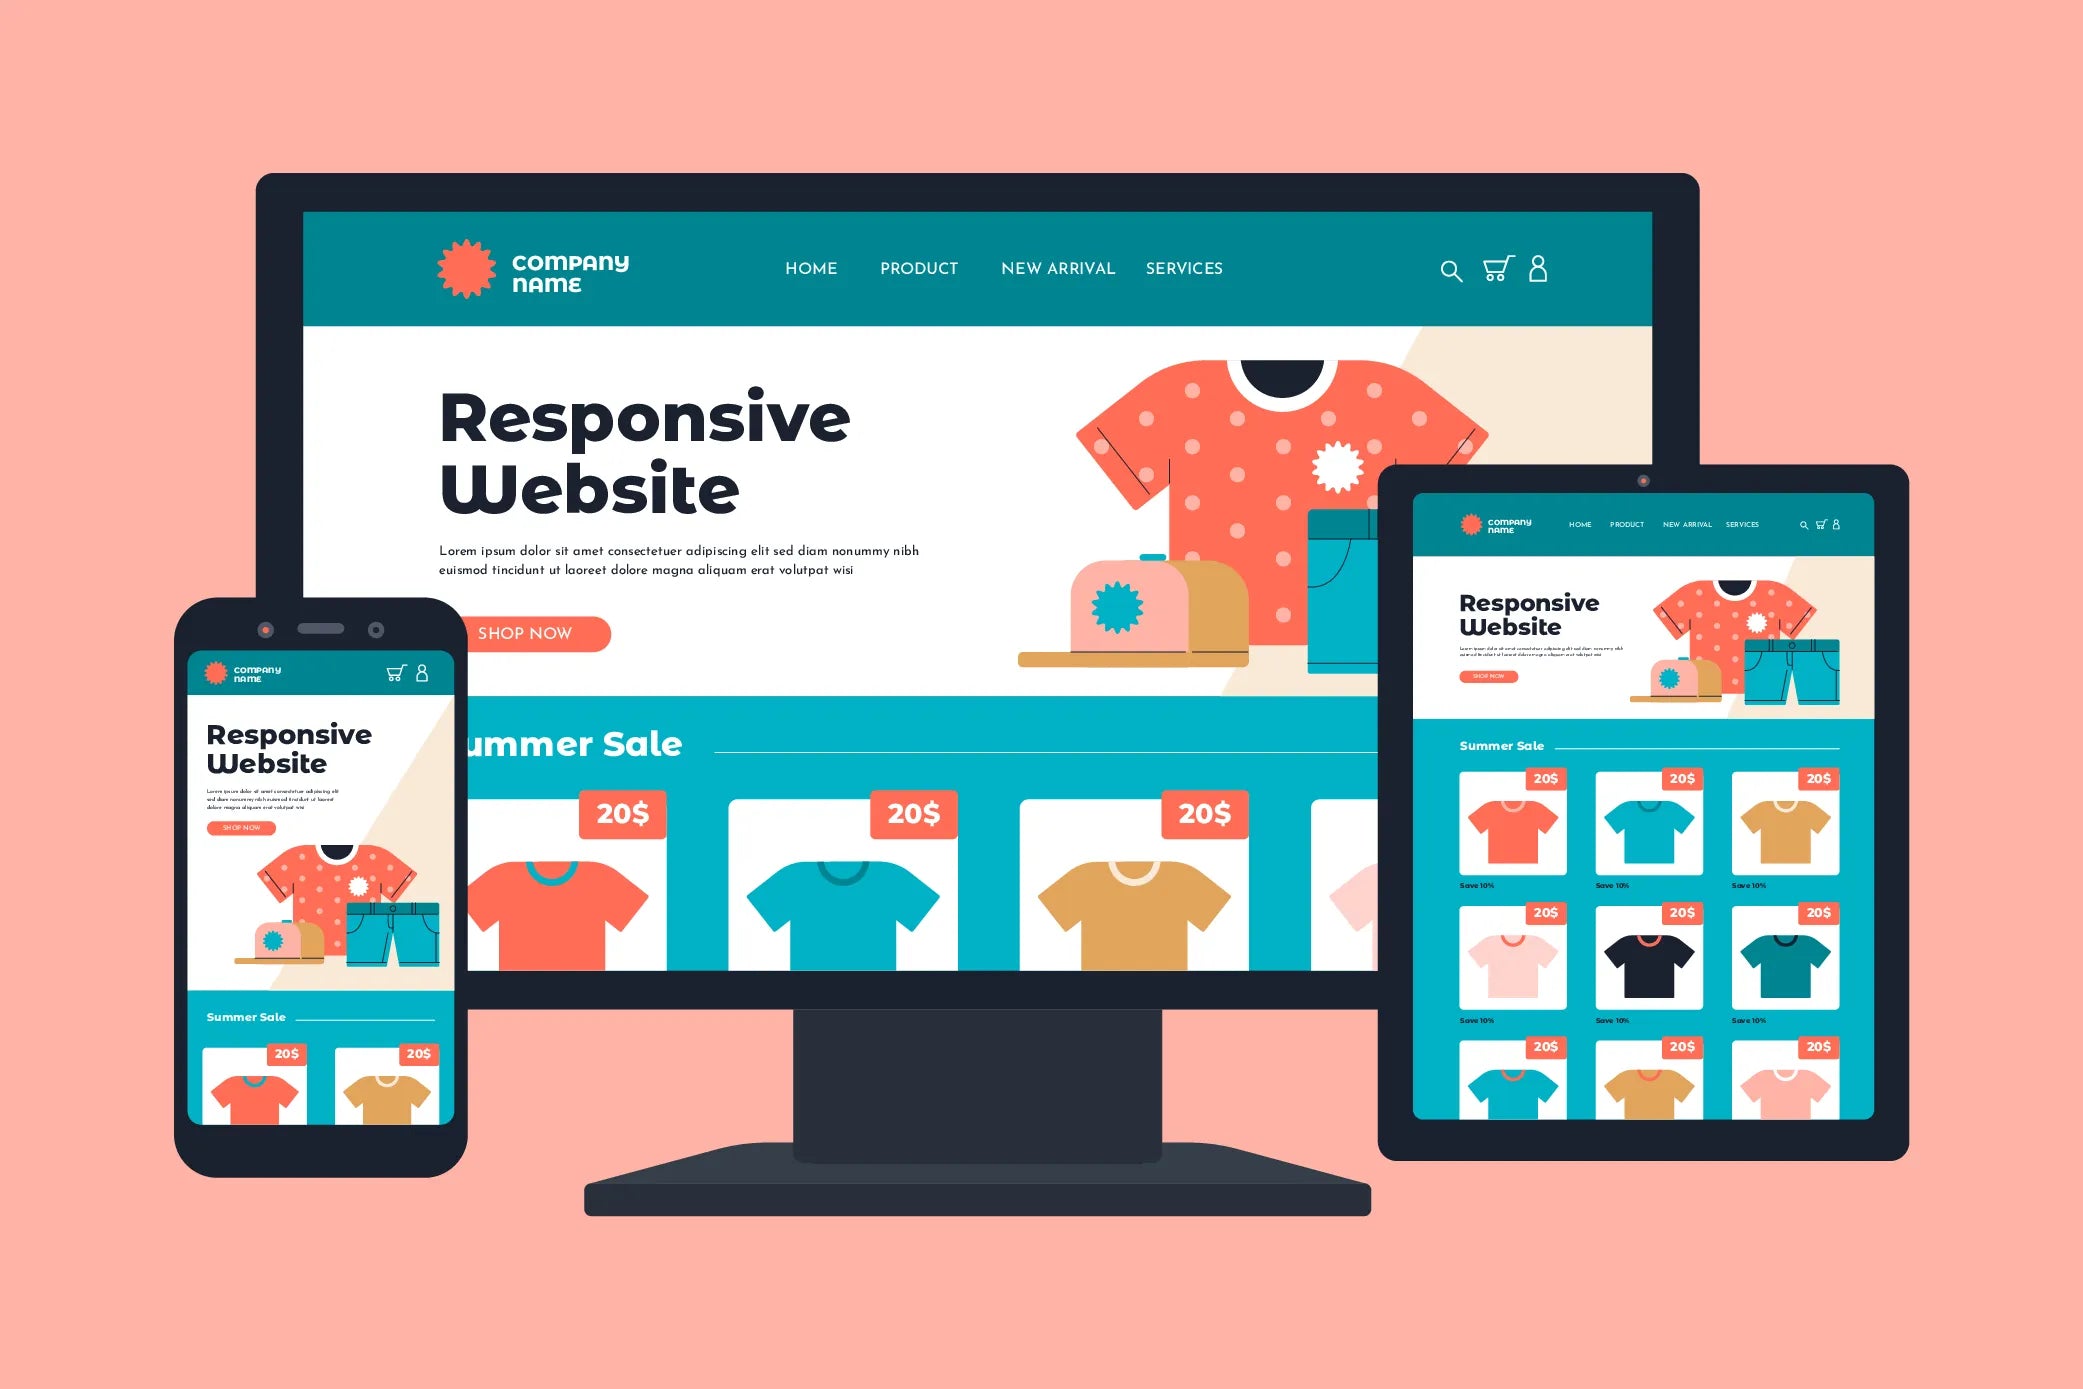 A responsive eCommerce website adapted to different devices. Image by Freepik.